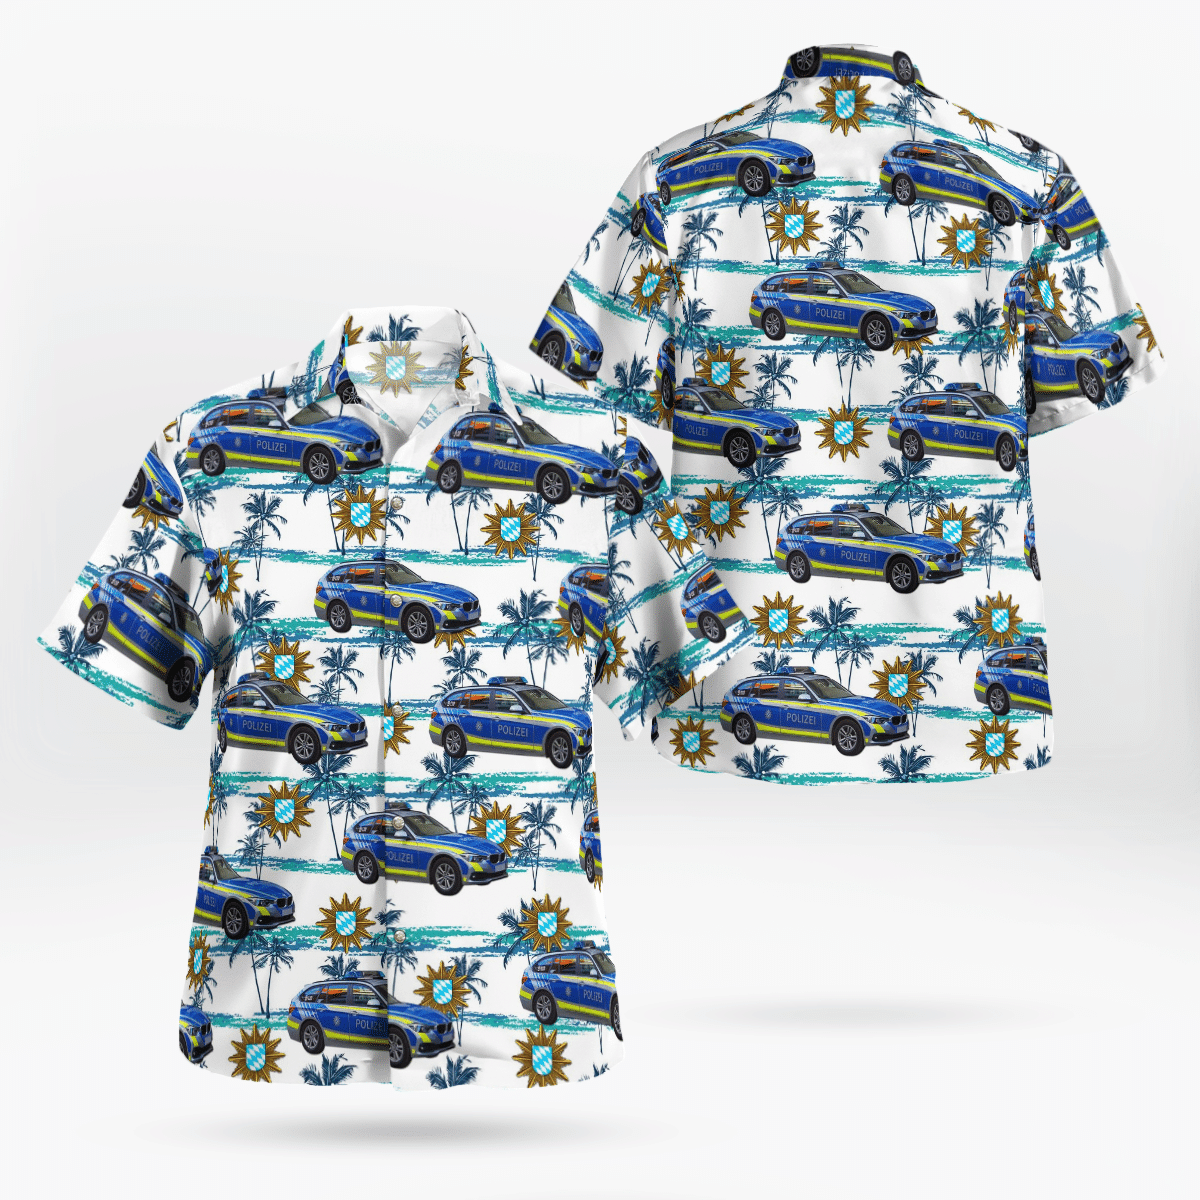 If you are in need of a new summertime look, pick up this Hawaiian shirt 260